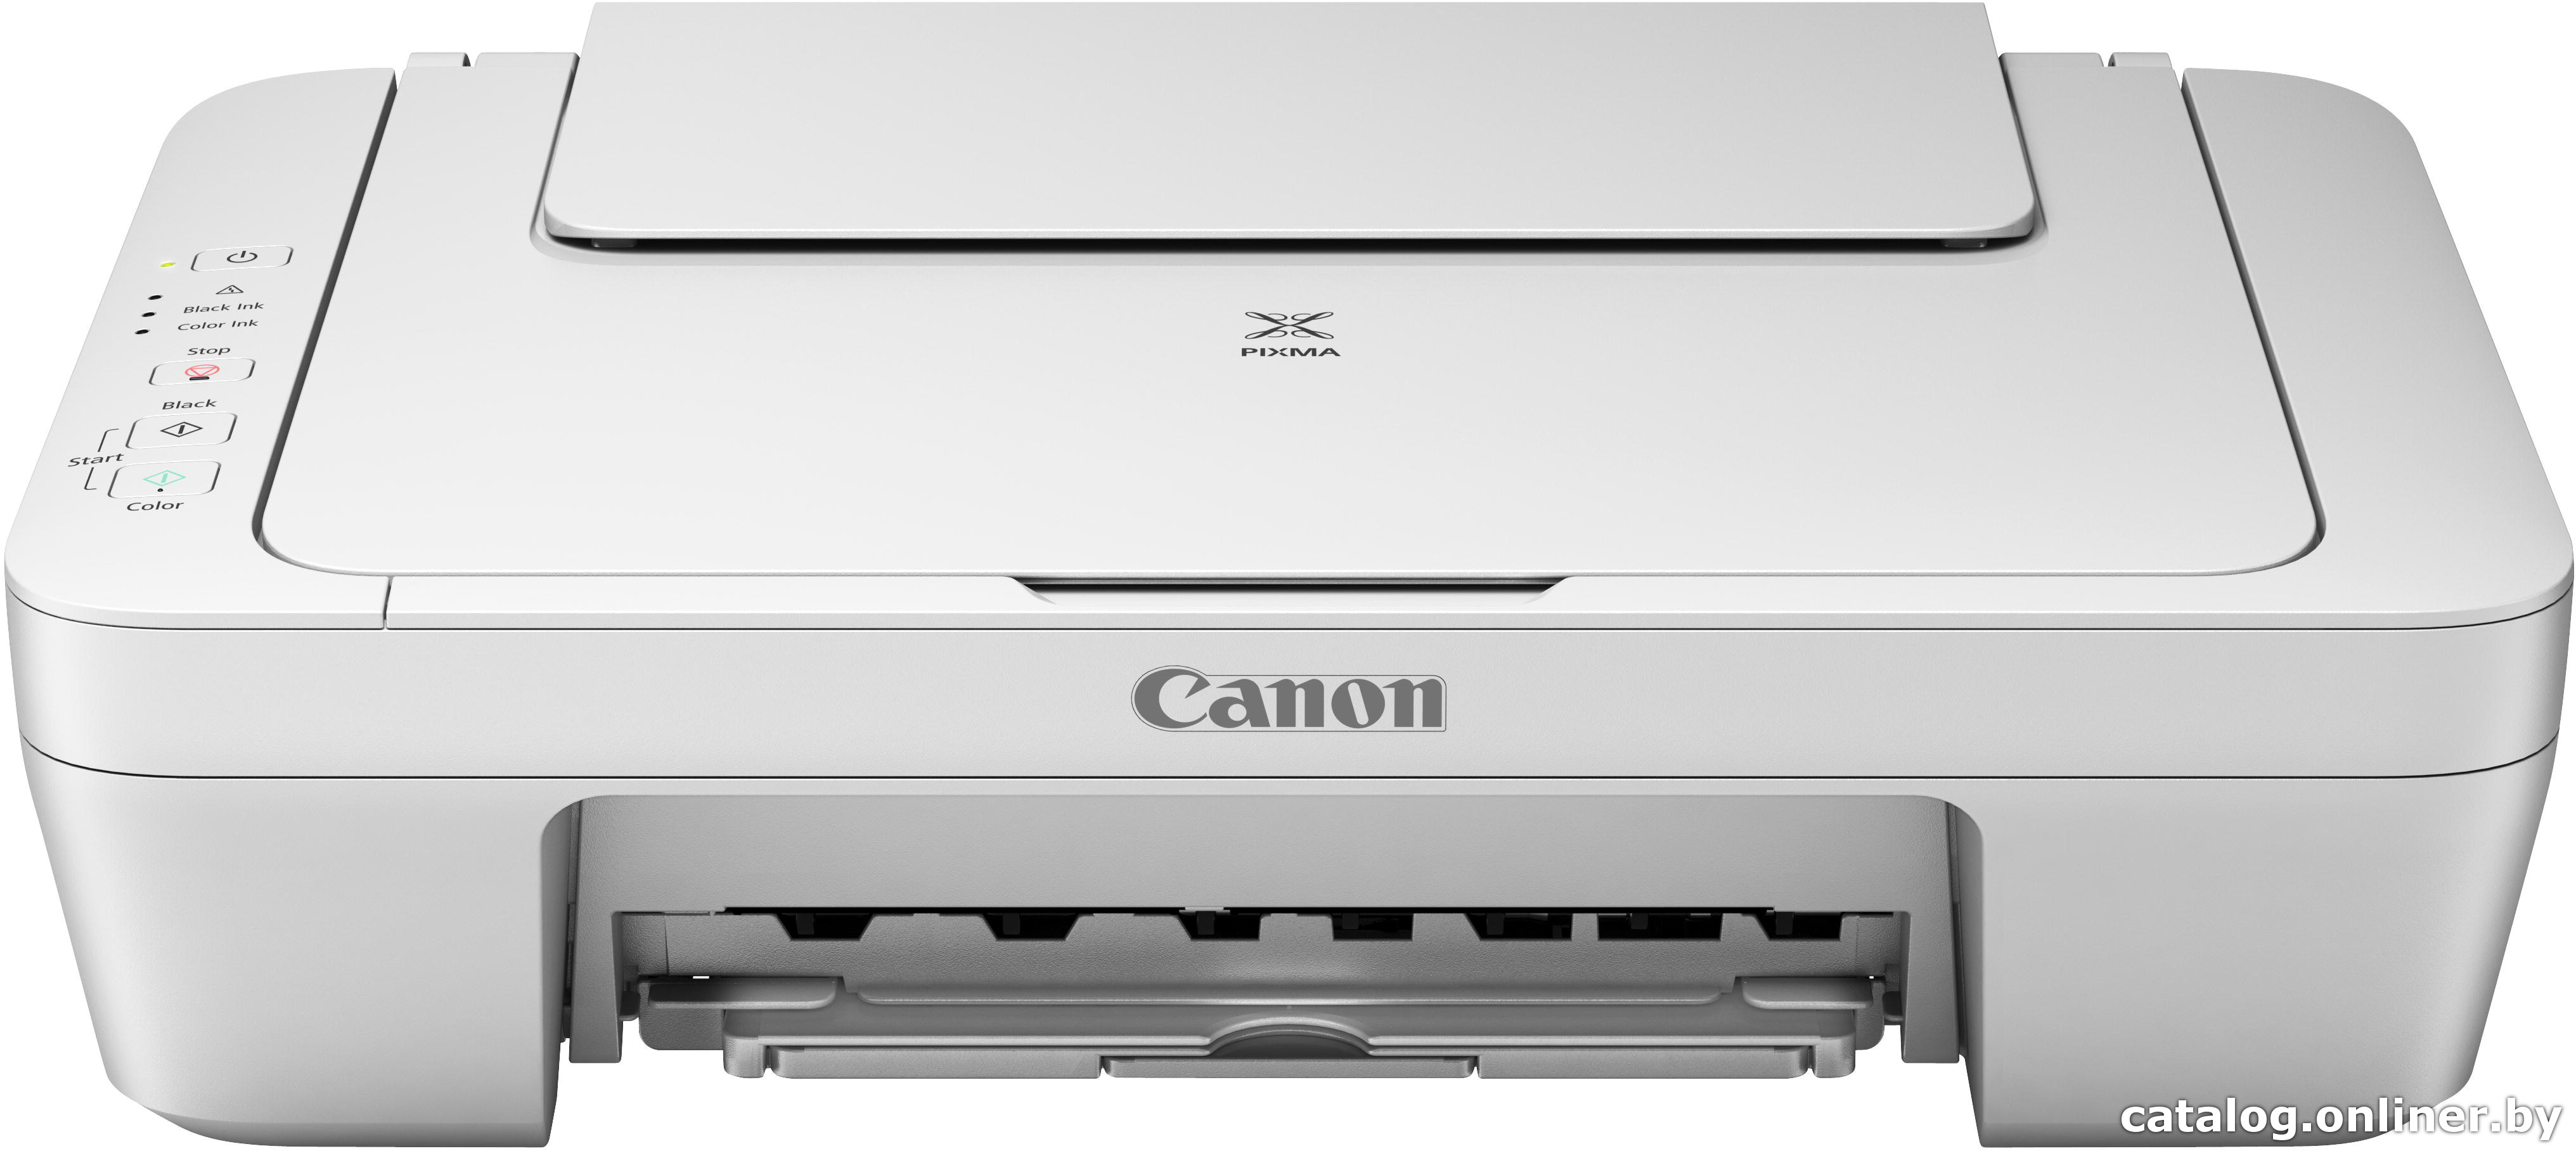 Canon MG2540S Scanner Driver Mac High Sierra 10.13 How to Download and Install - Featured